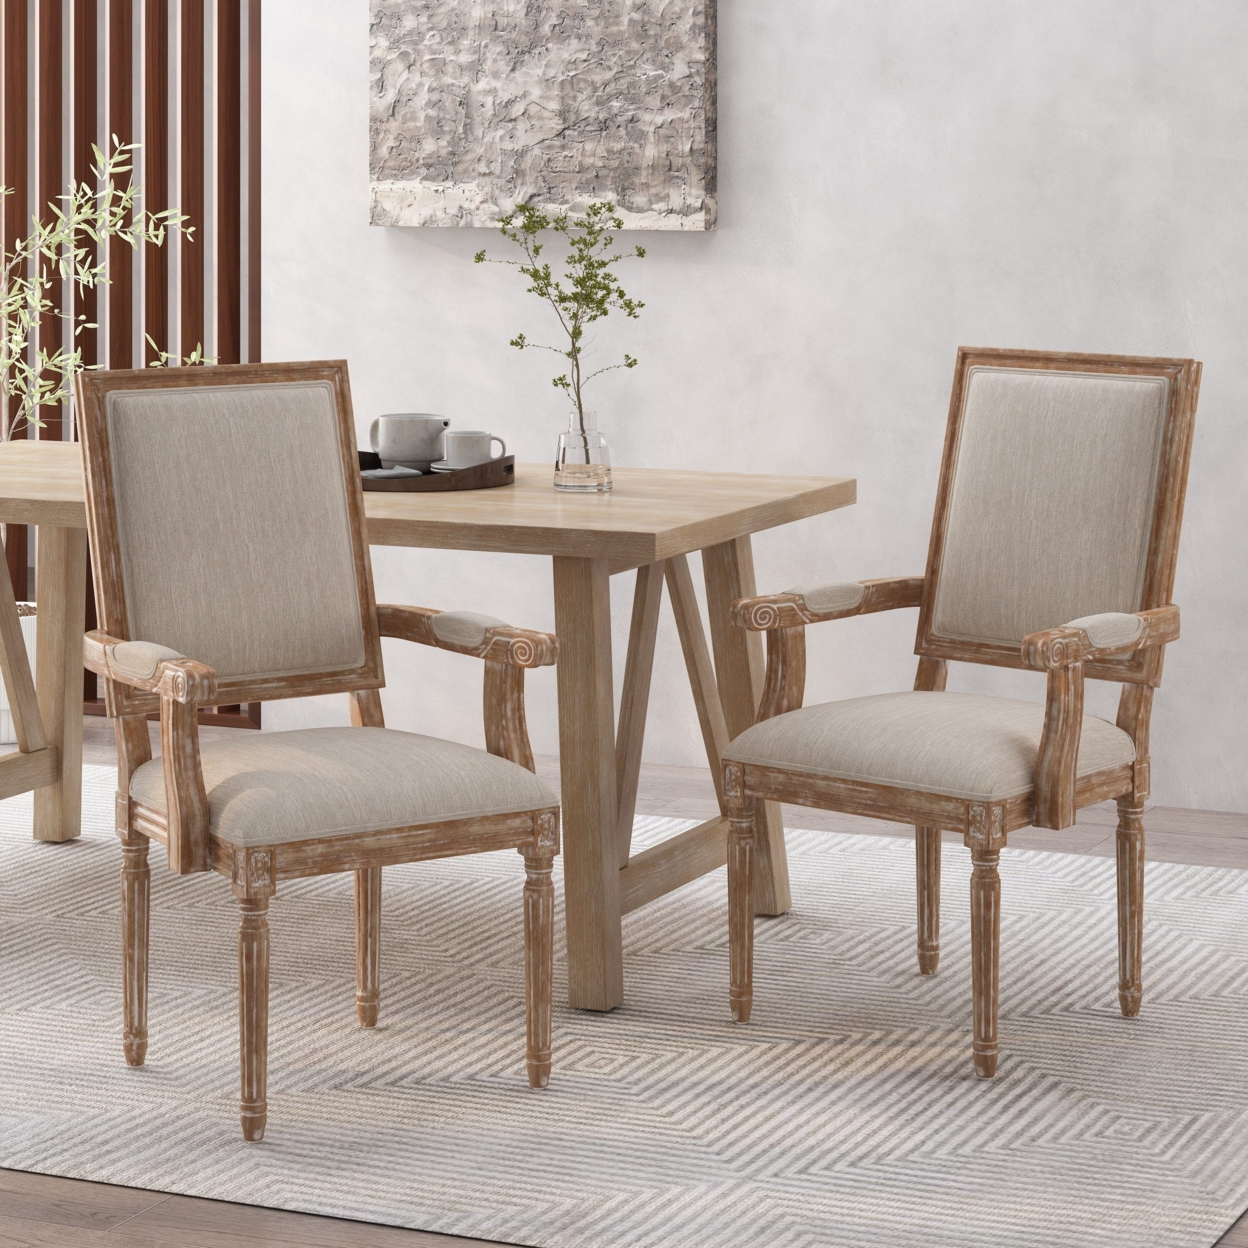 Zentner French Country Wood Upholstered Dining Chair - Natural/brown, Set Of 6